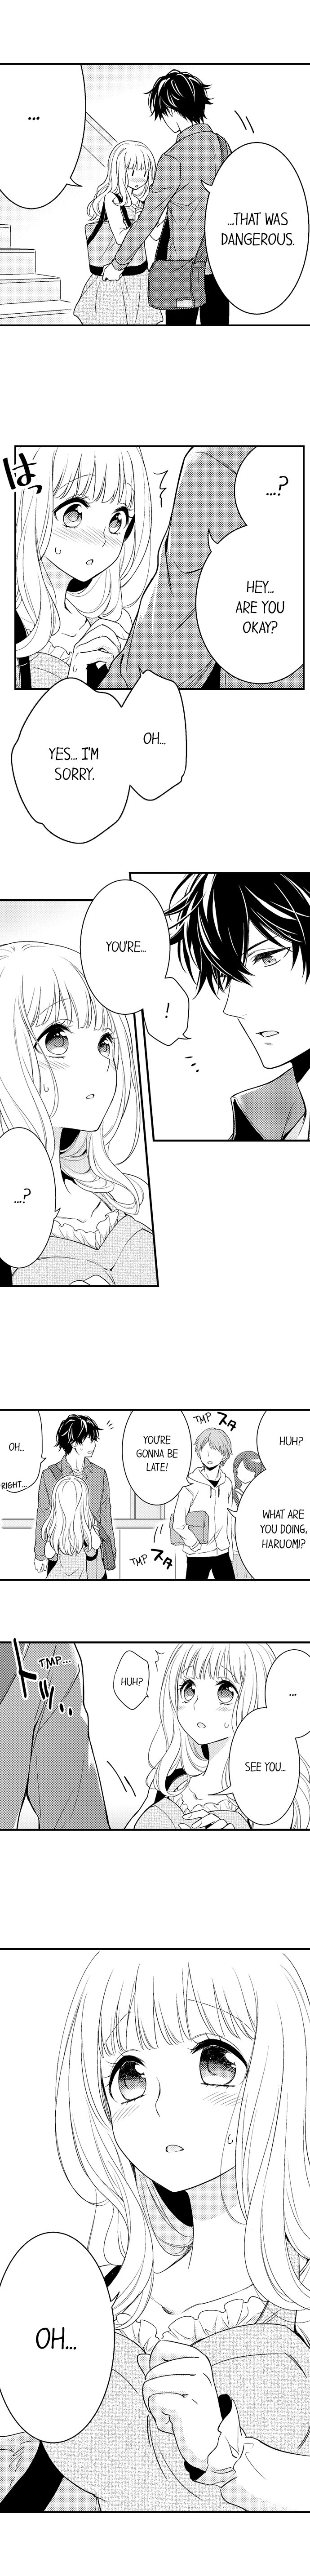 Let Me Sleep with You, Haruomi-kun! Ch.1